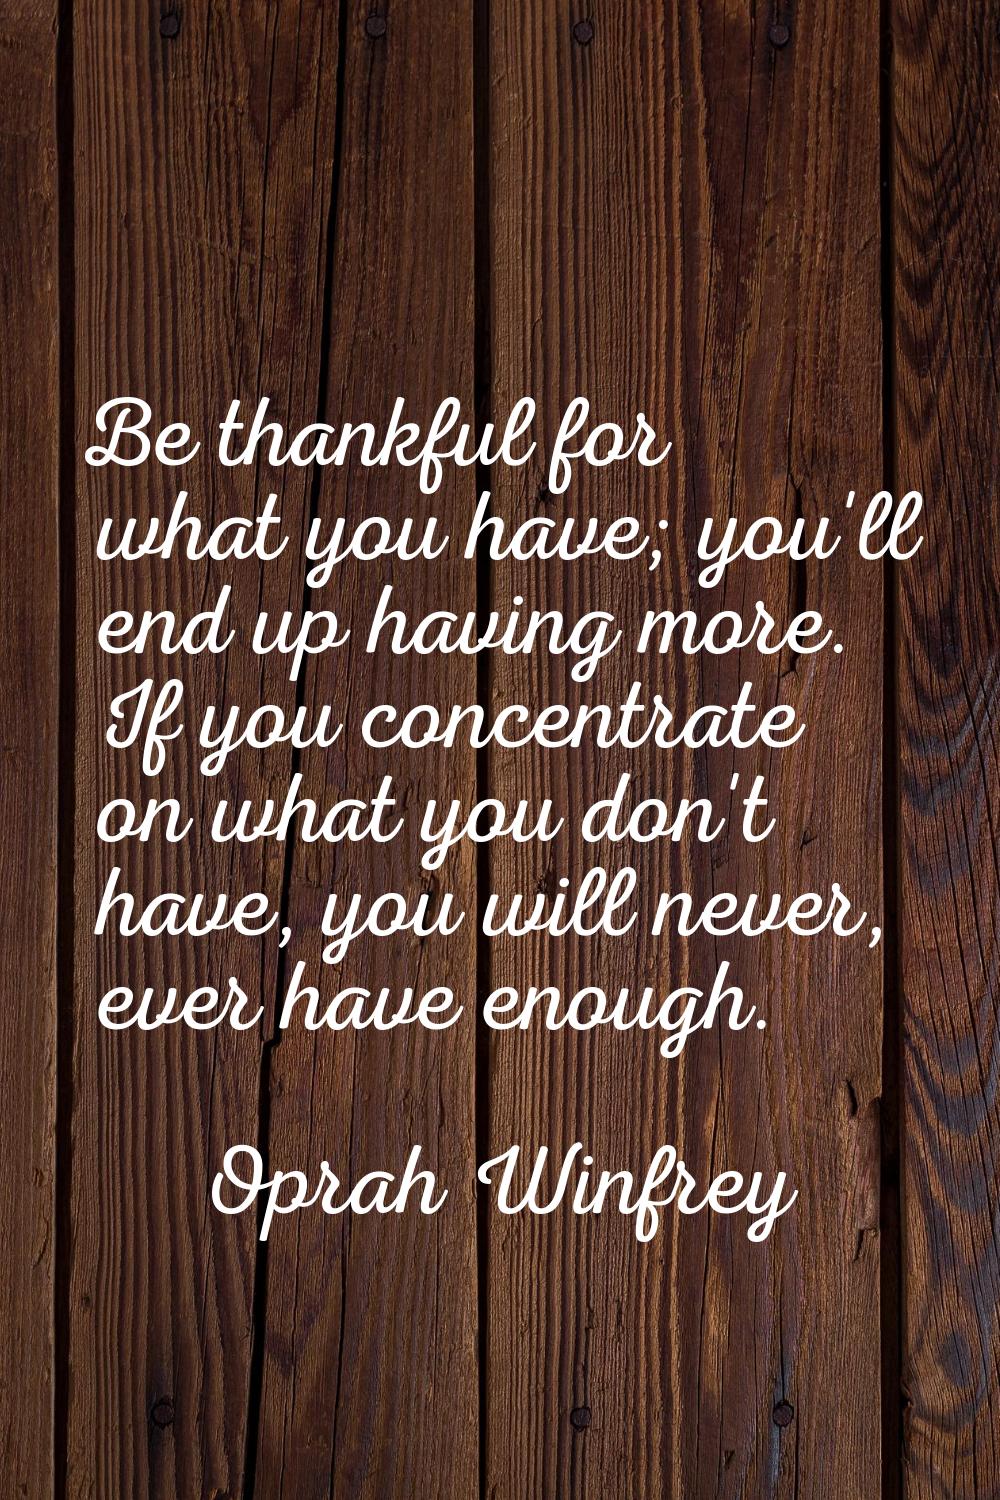 Be thankful for what you have; you'll end up having more. If you concentrate on what you don't have